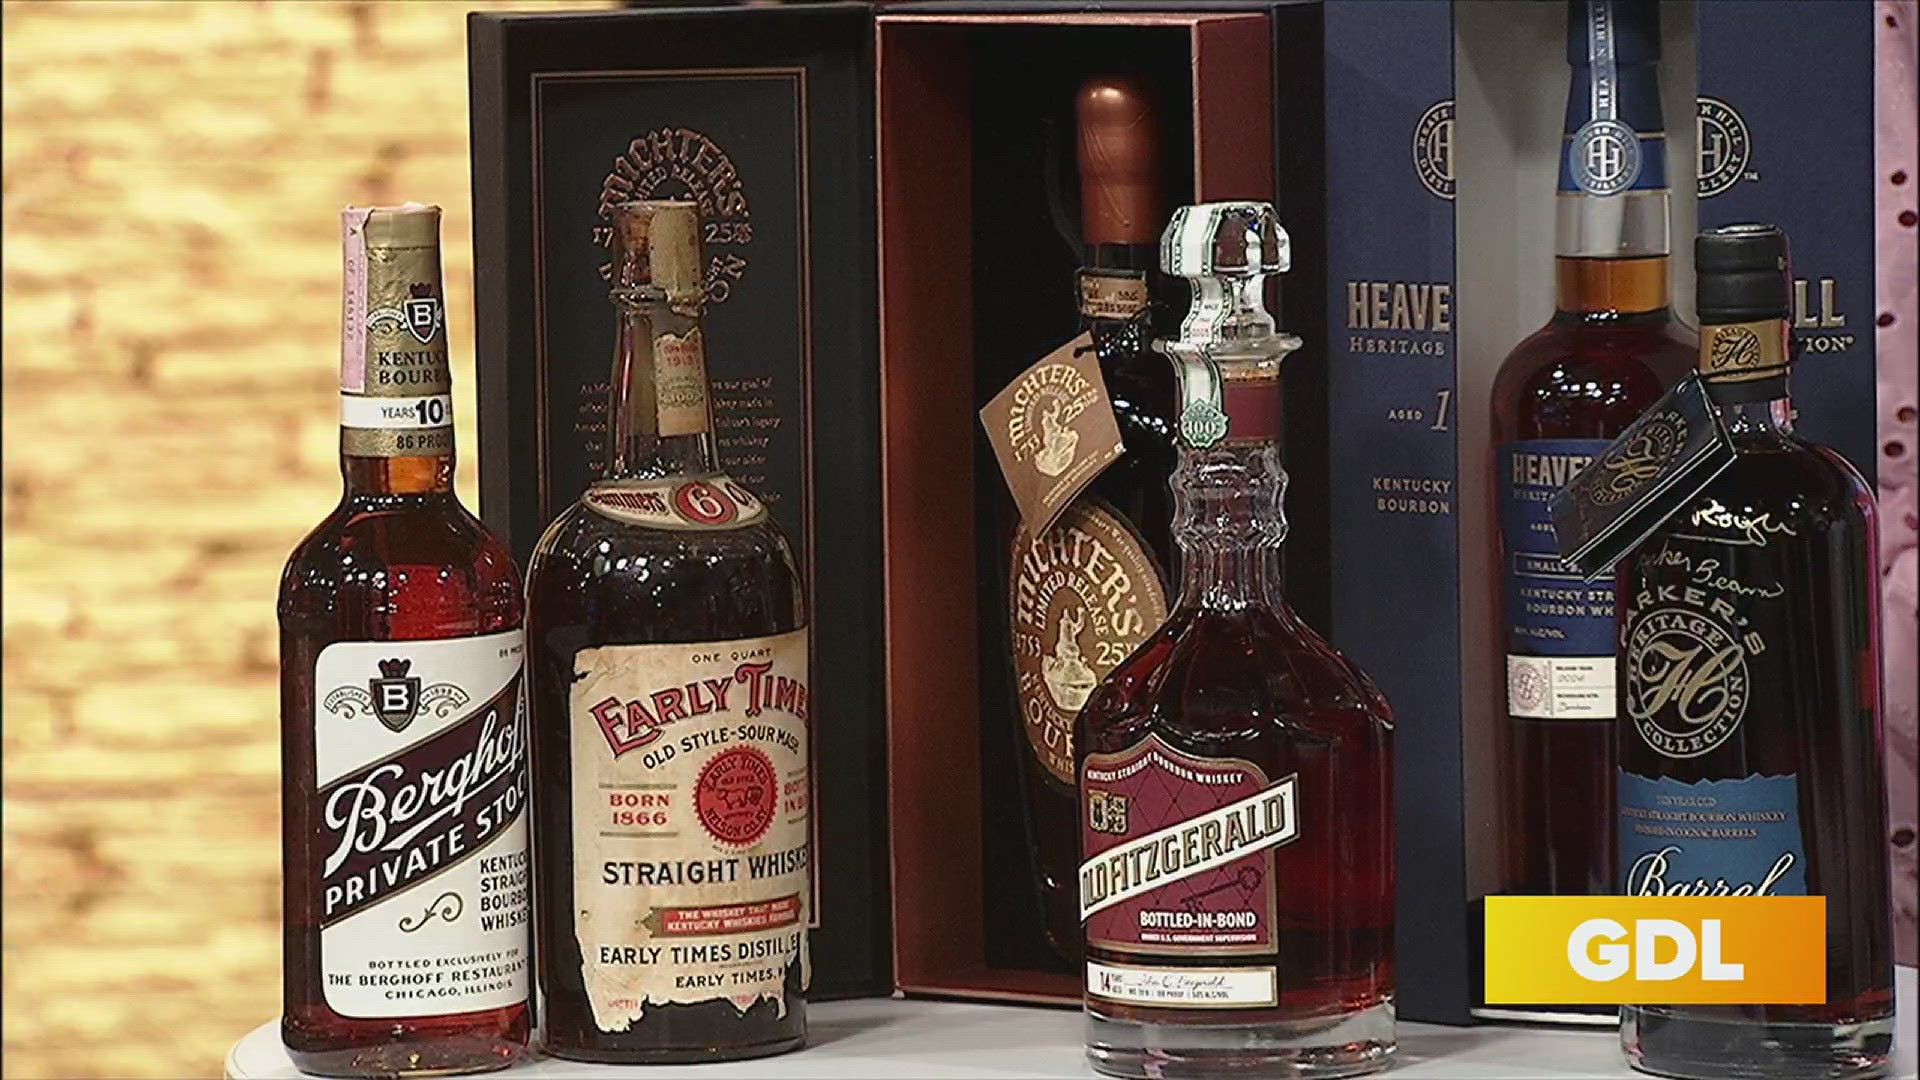 The ultimate bourbon raffle will use its proceeds to go toward to the West End School.